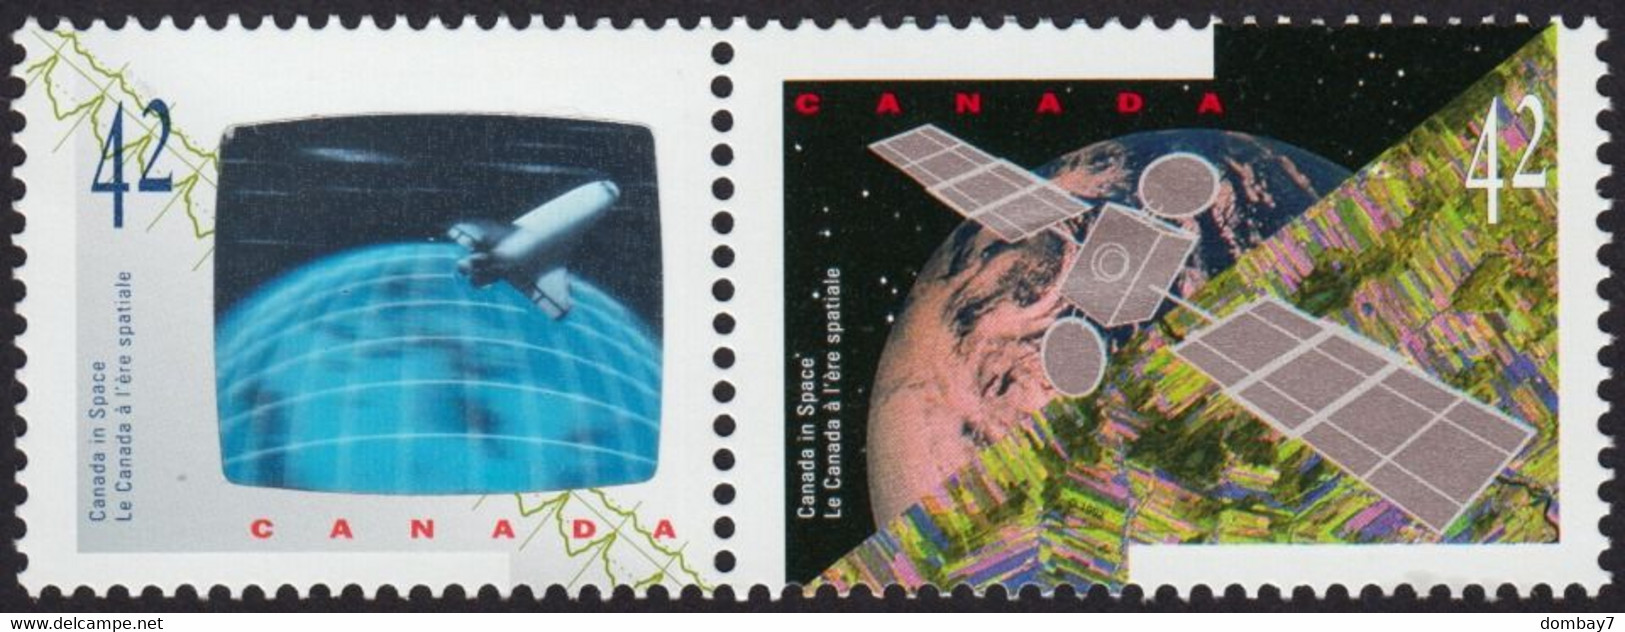 Qt. CANADA IN SPACE = 3D, HOLOGRAM (right) = SATELLITE, SHUTTLE Se-tenant Pair, TYPE-2 Canada 1992 Sc#1442a MNH - Holograms